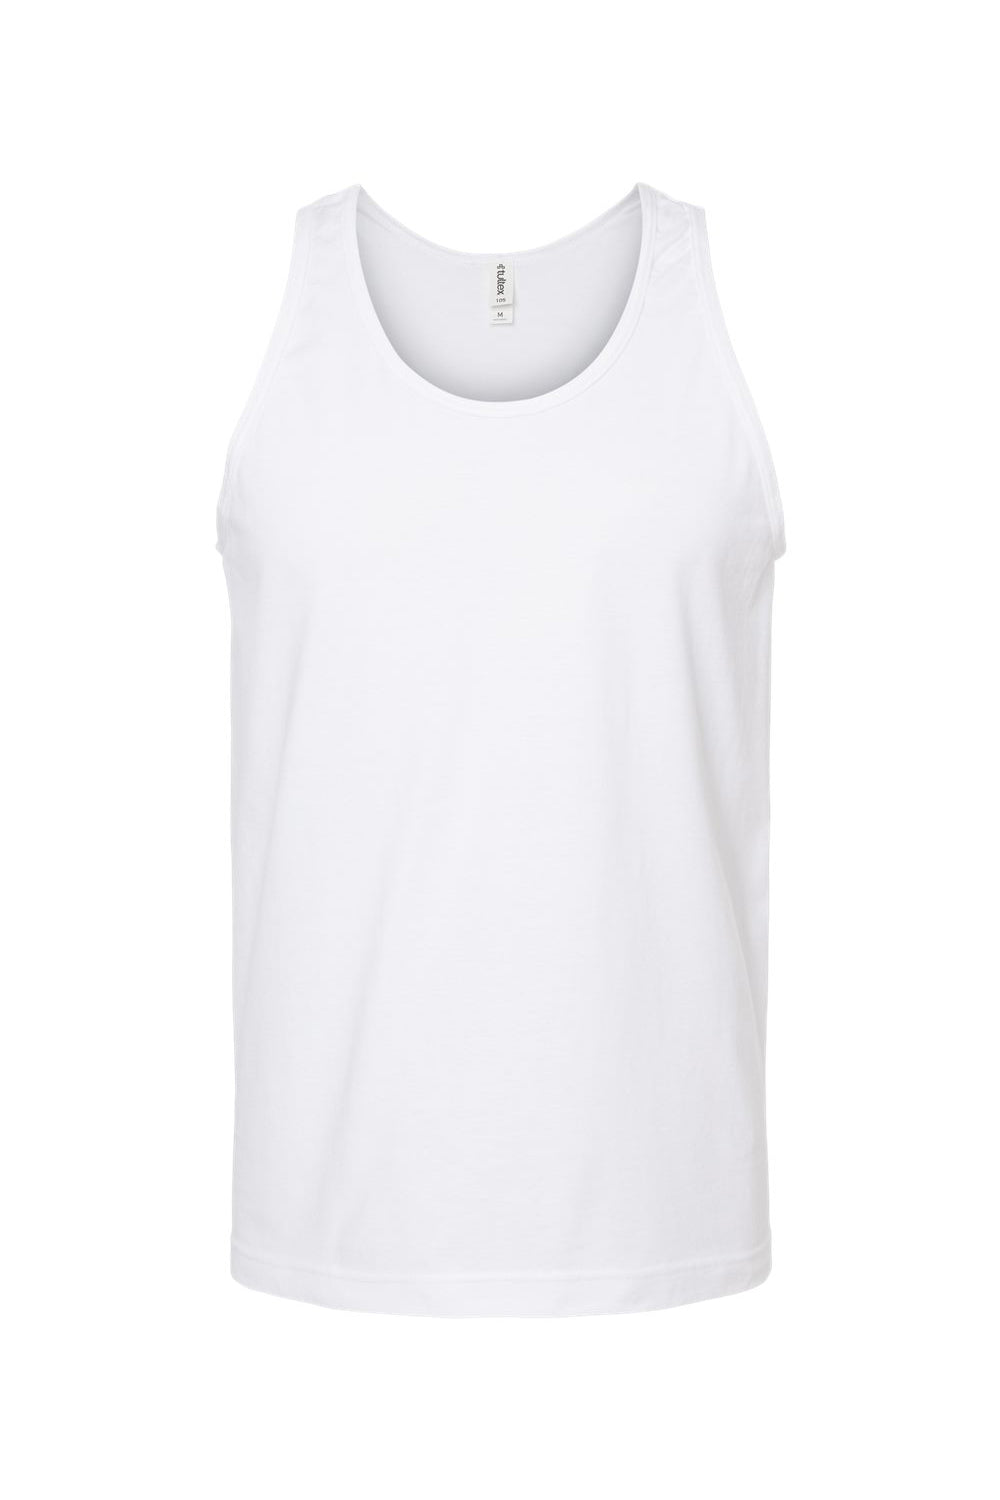 Tultex S105 Mens Fine Jersey Tank Top White Flat Front